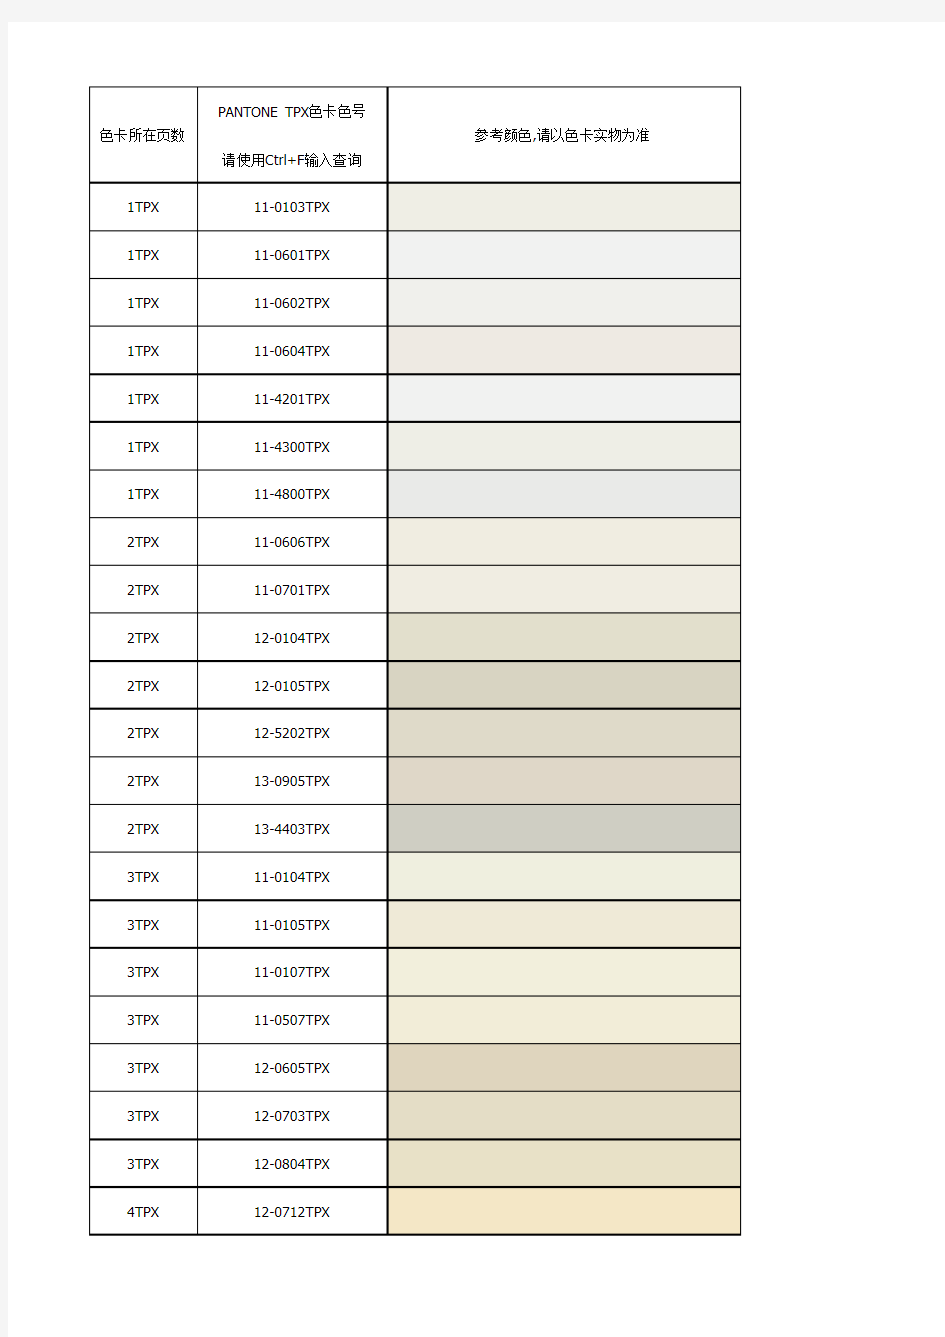 Pantone TPX colors and color names